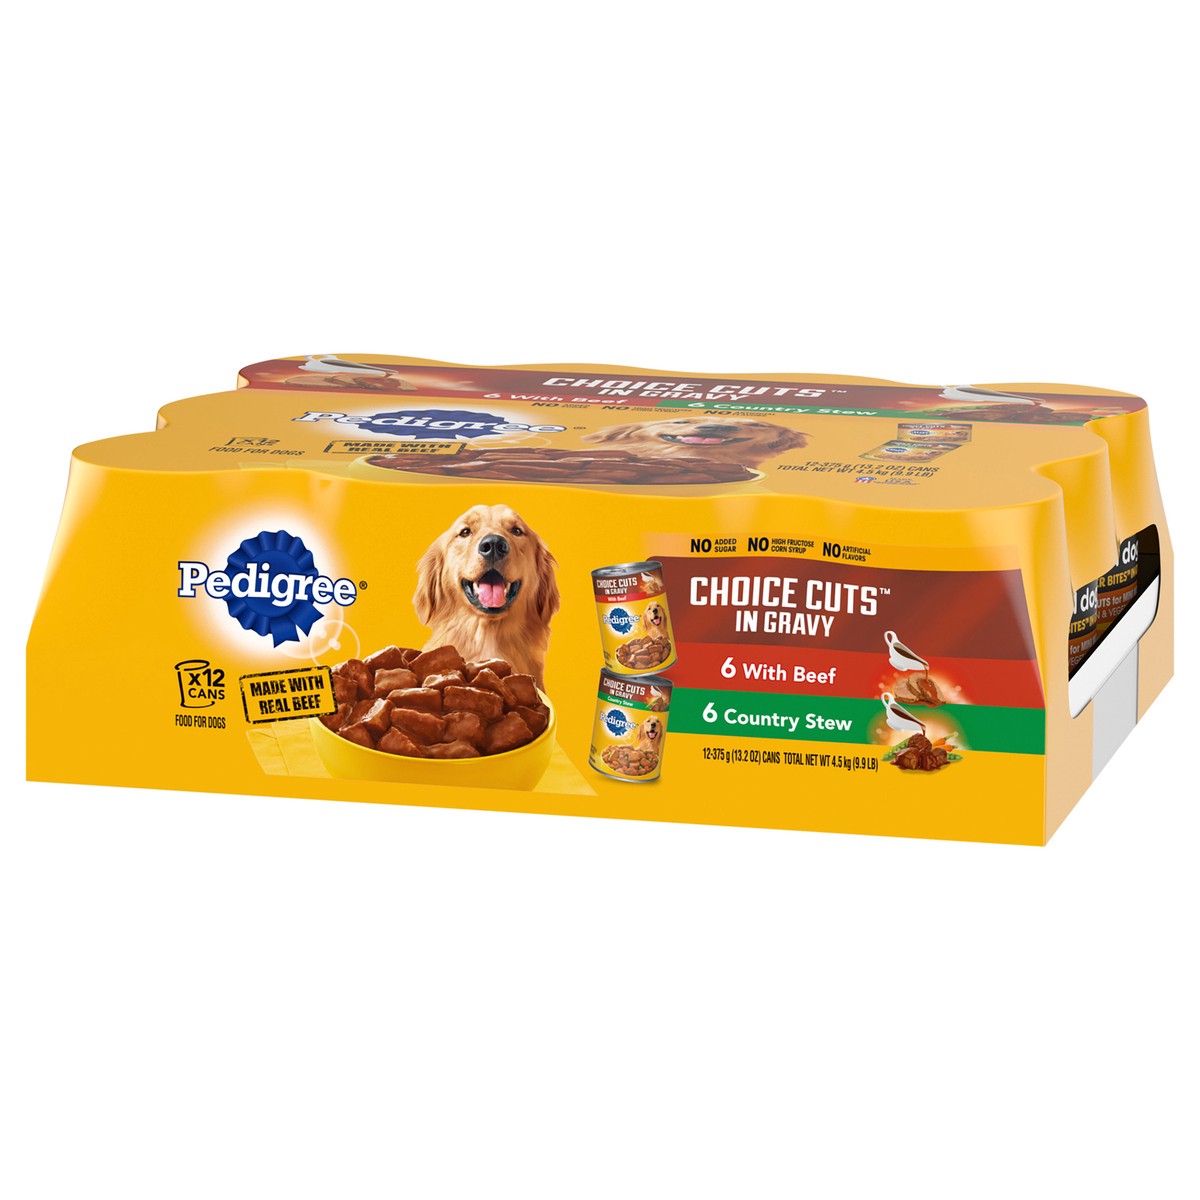 slide 3 of 9, Pedigree Choice Cuts in Gravy Combo Pack Beef & Country Stew Wet Dog Food, 13.2 oz, 12 ct